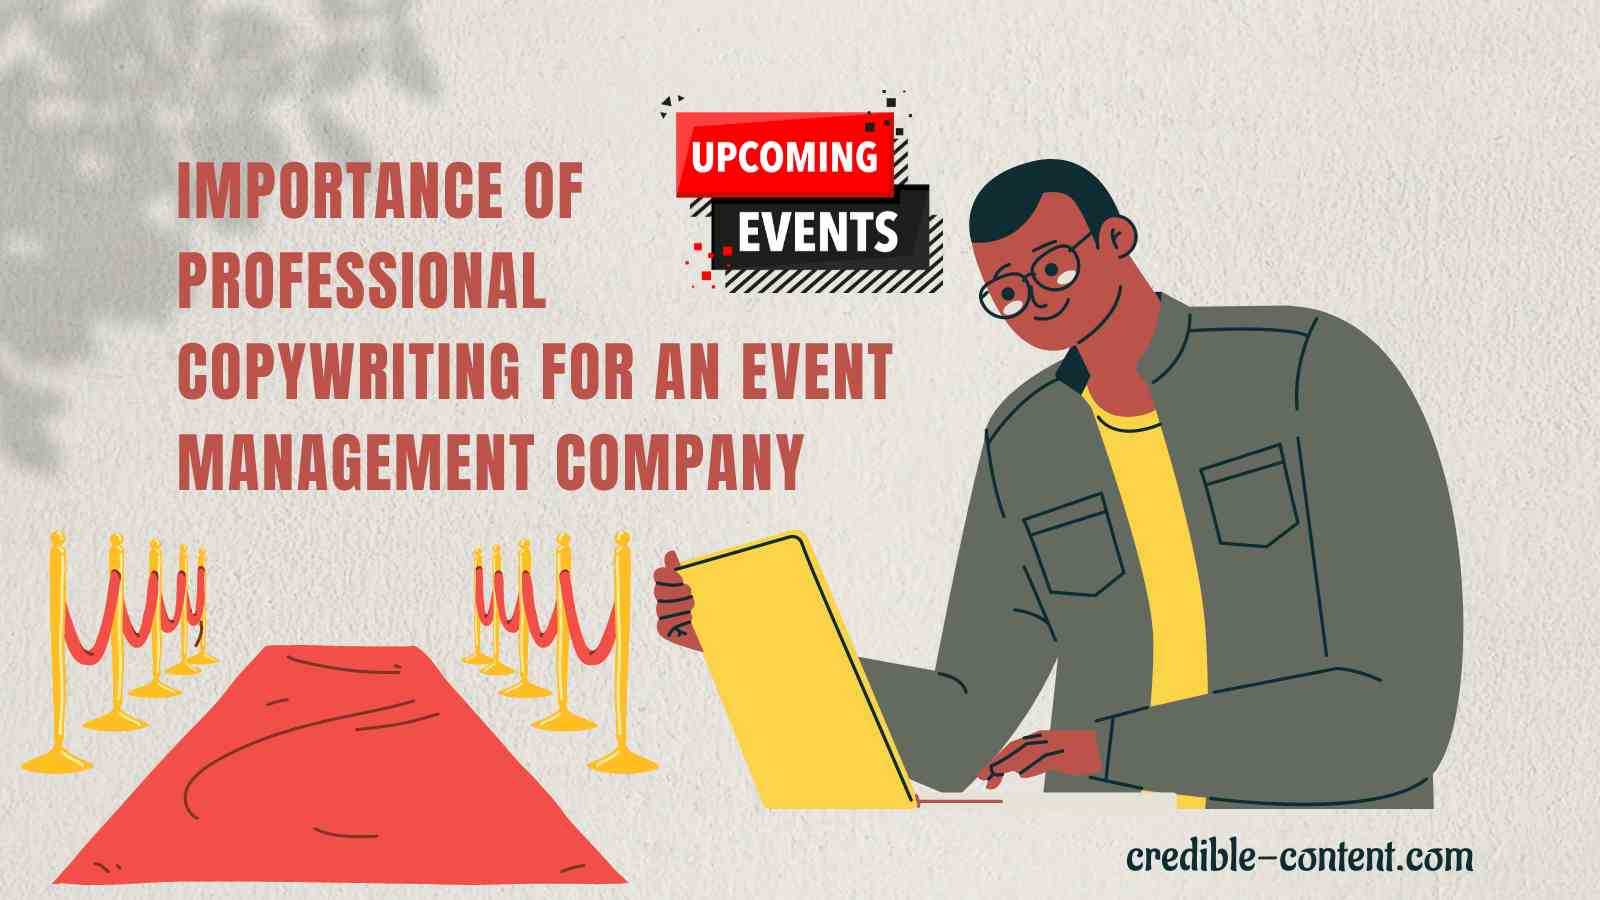 Importance of professional copywriting for an event management company